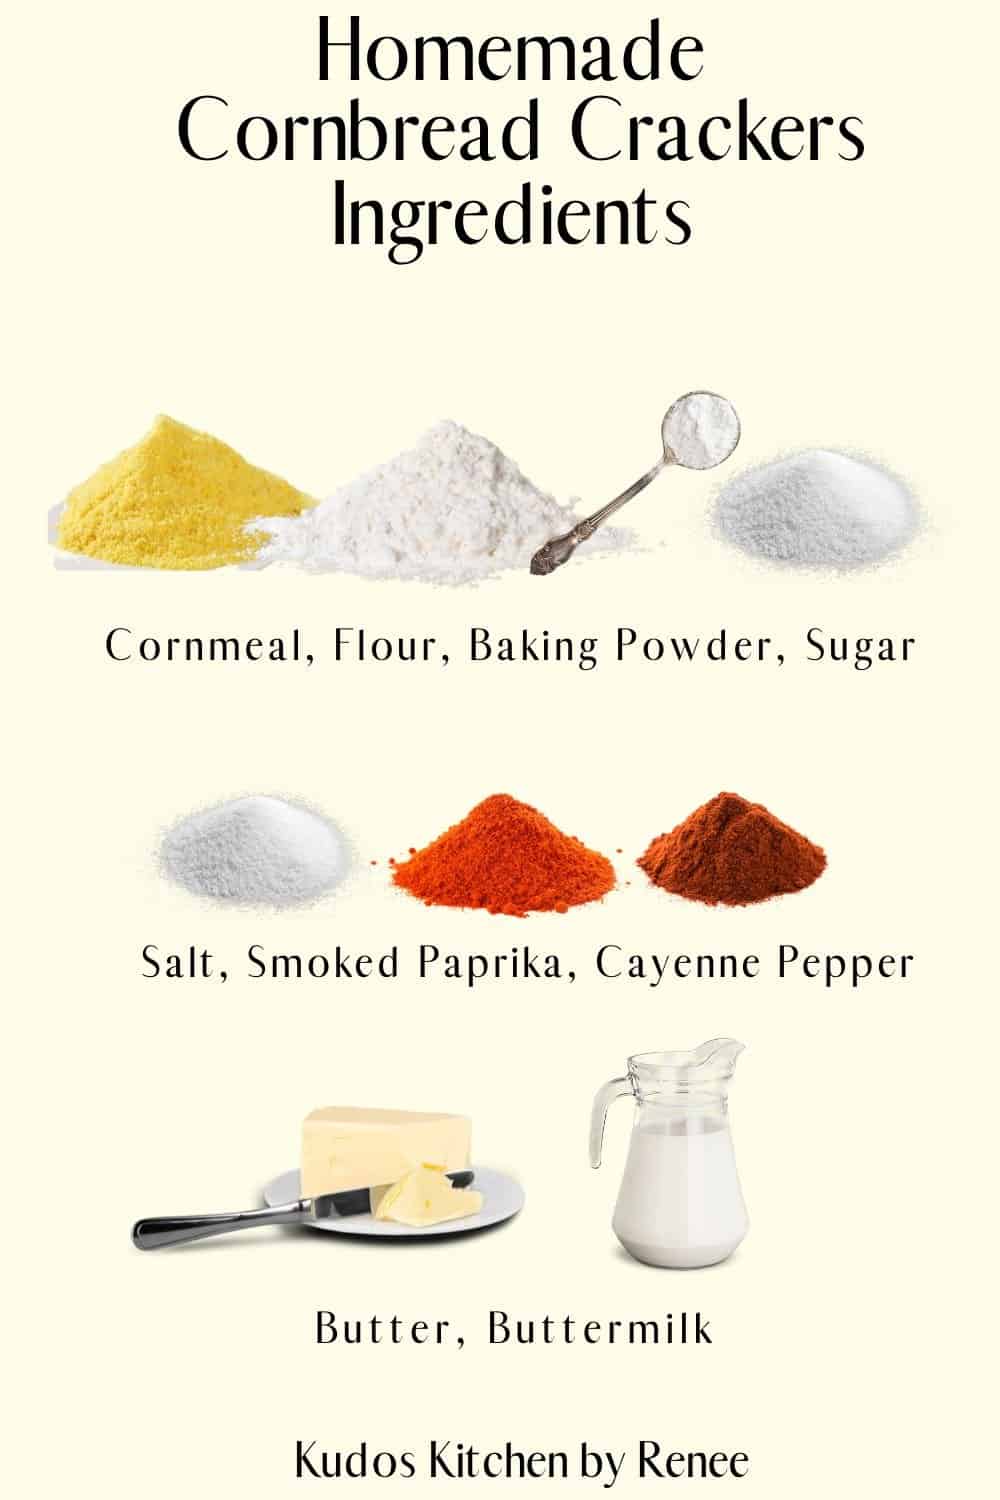 A visual ingredient list for what's needed to make Homemade Cornbread Crackers.